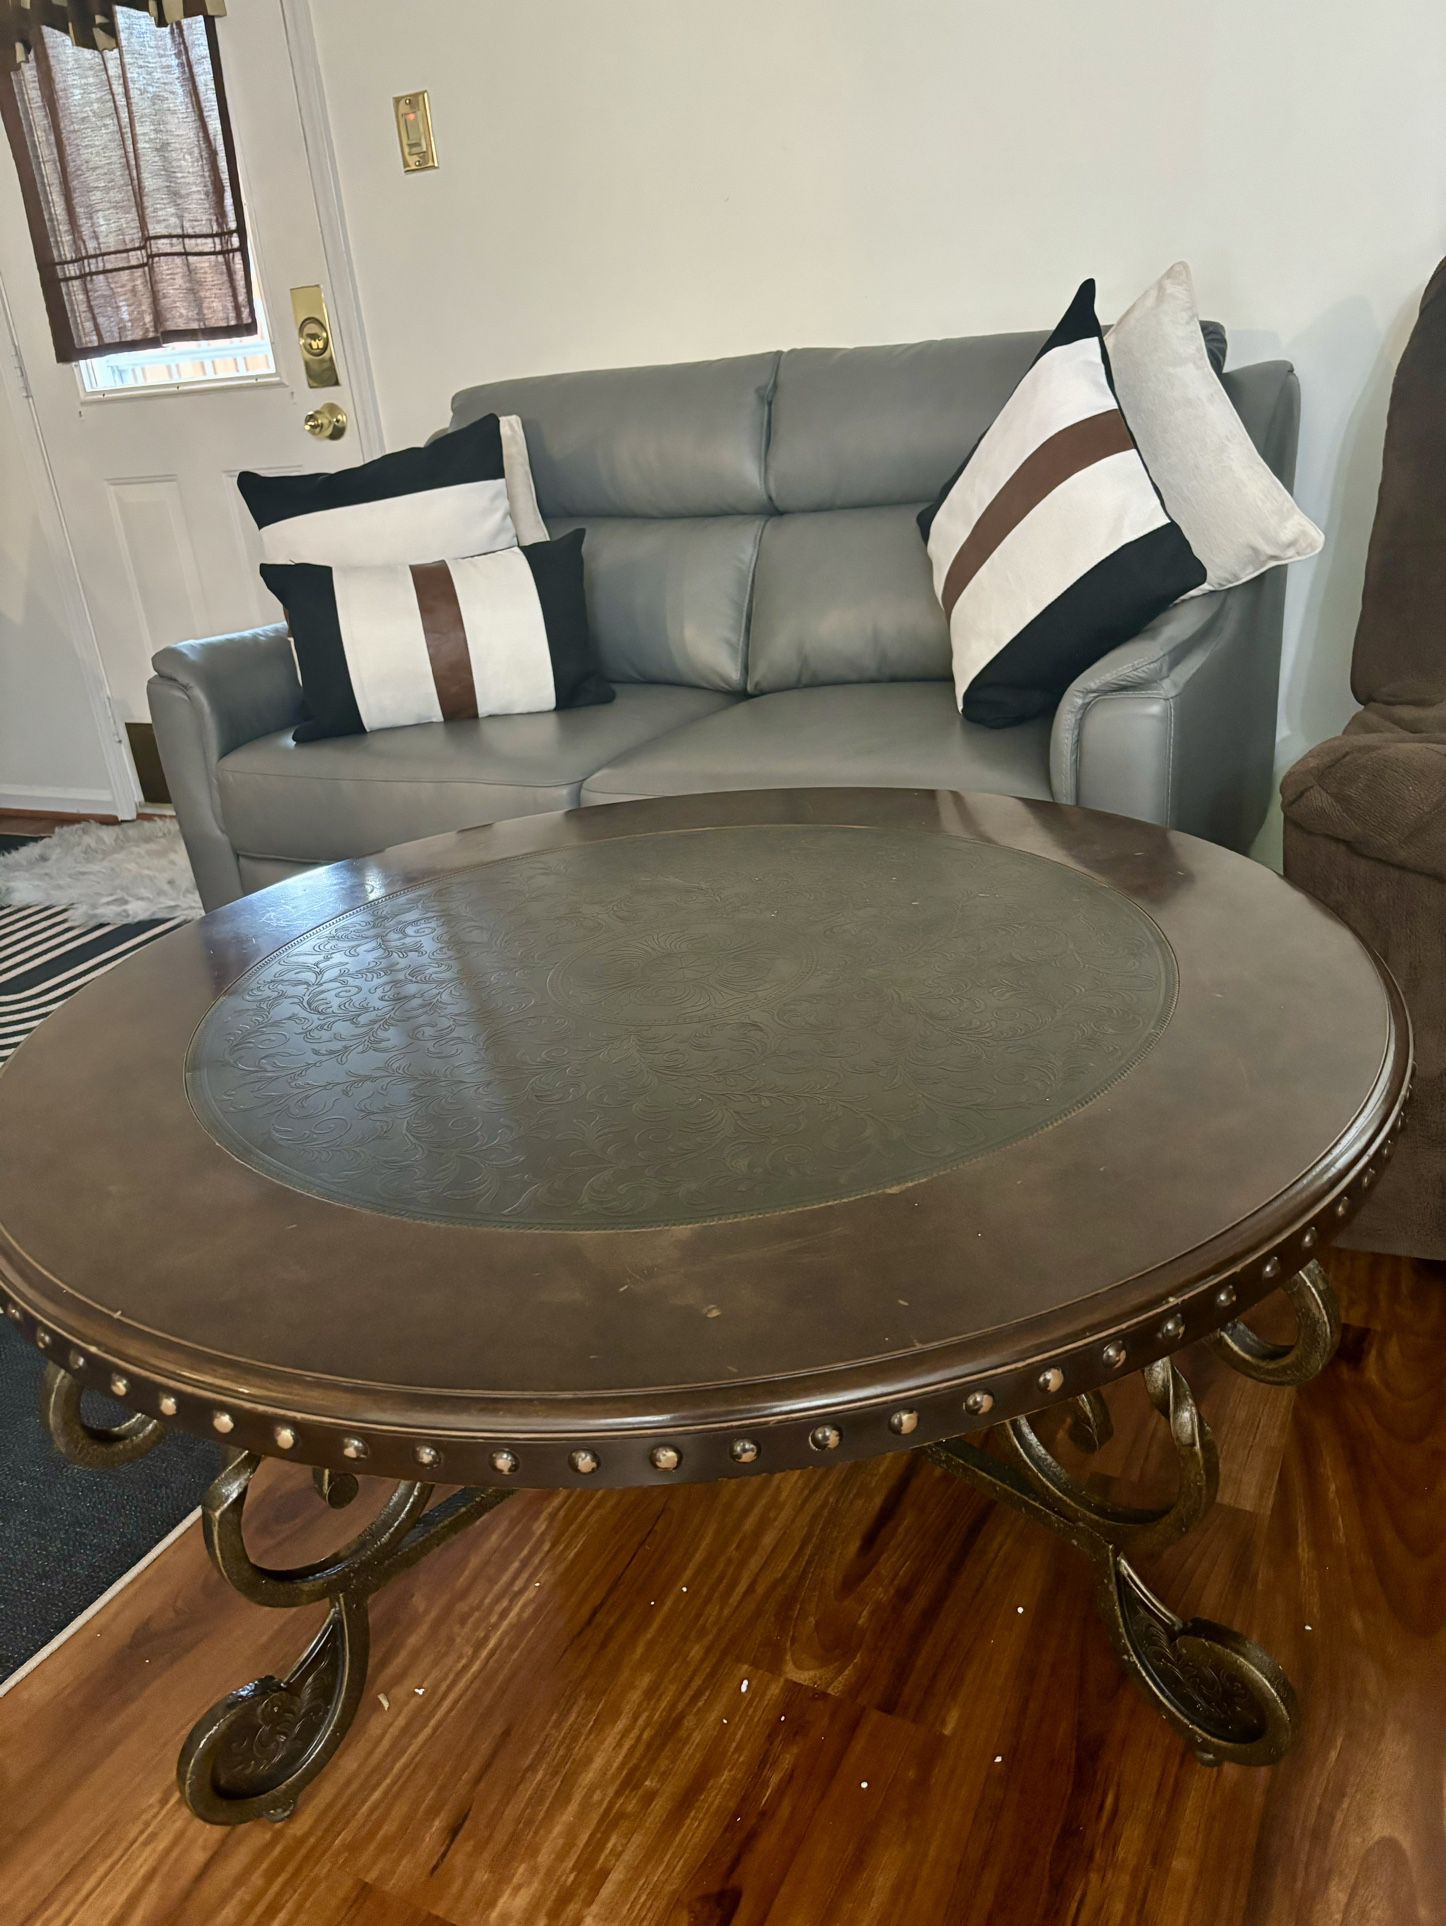 Solid Antique wooden Center Table